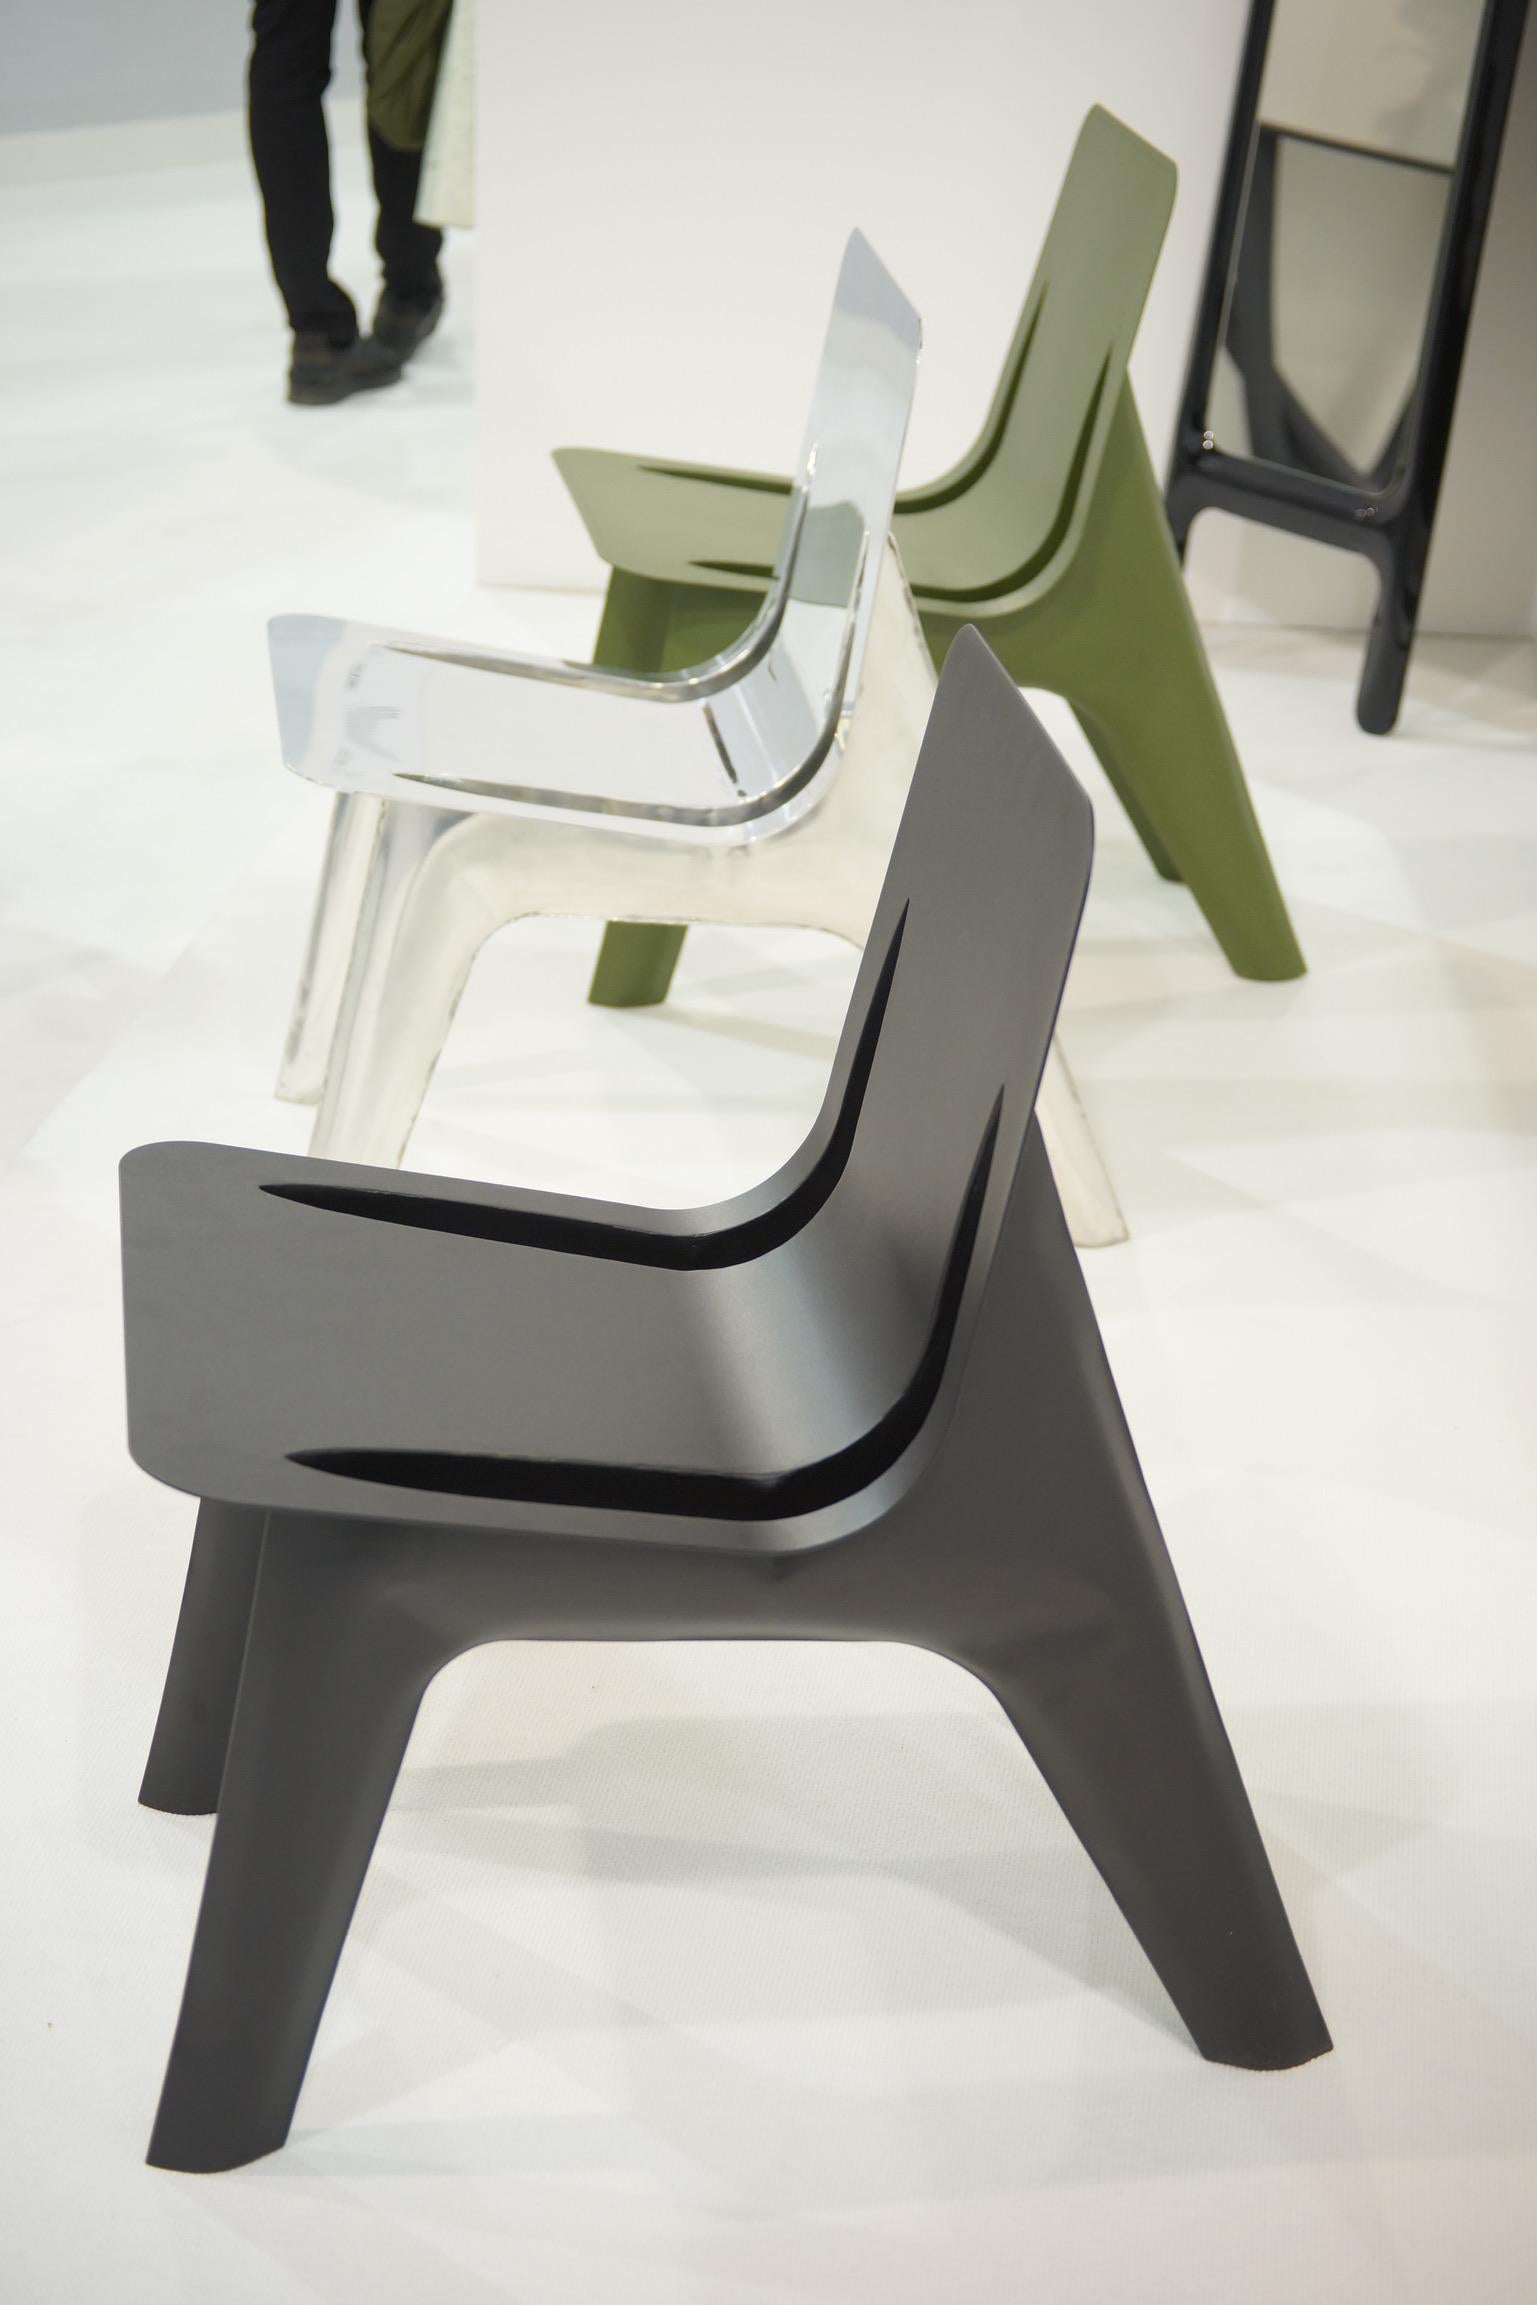 J-Chair Lounge Polished Umbra Grey Color Aluminum Seating by Zieta In New Condition For Sale In Beverly Hills, CA